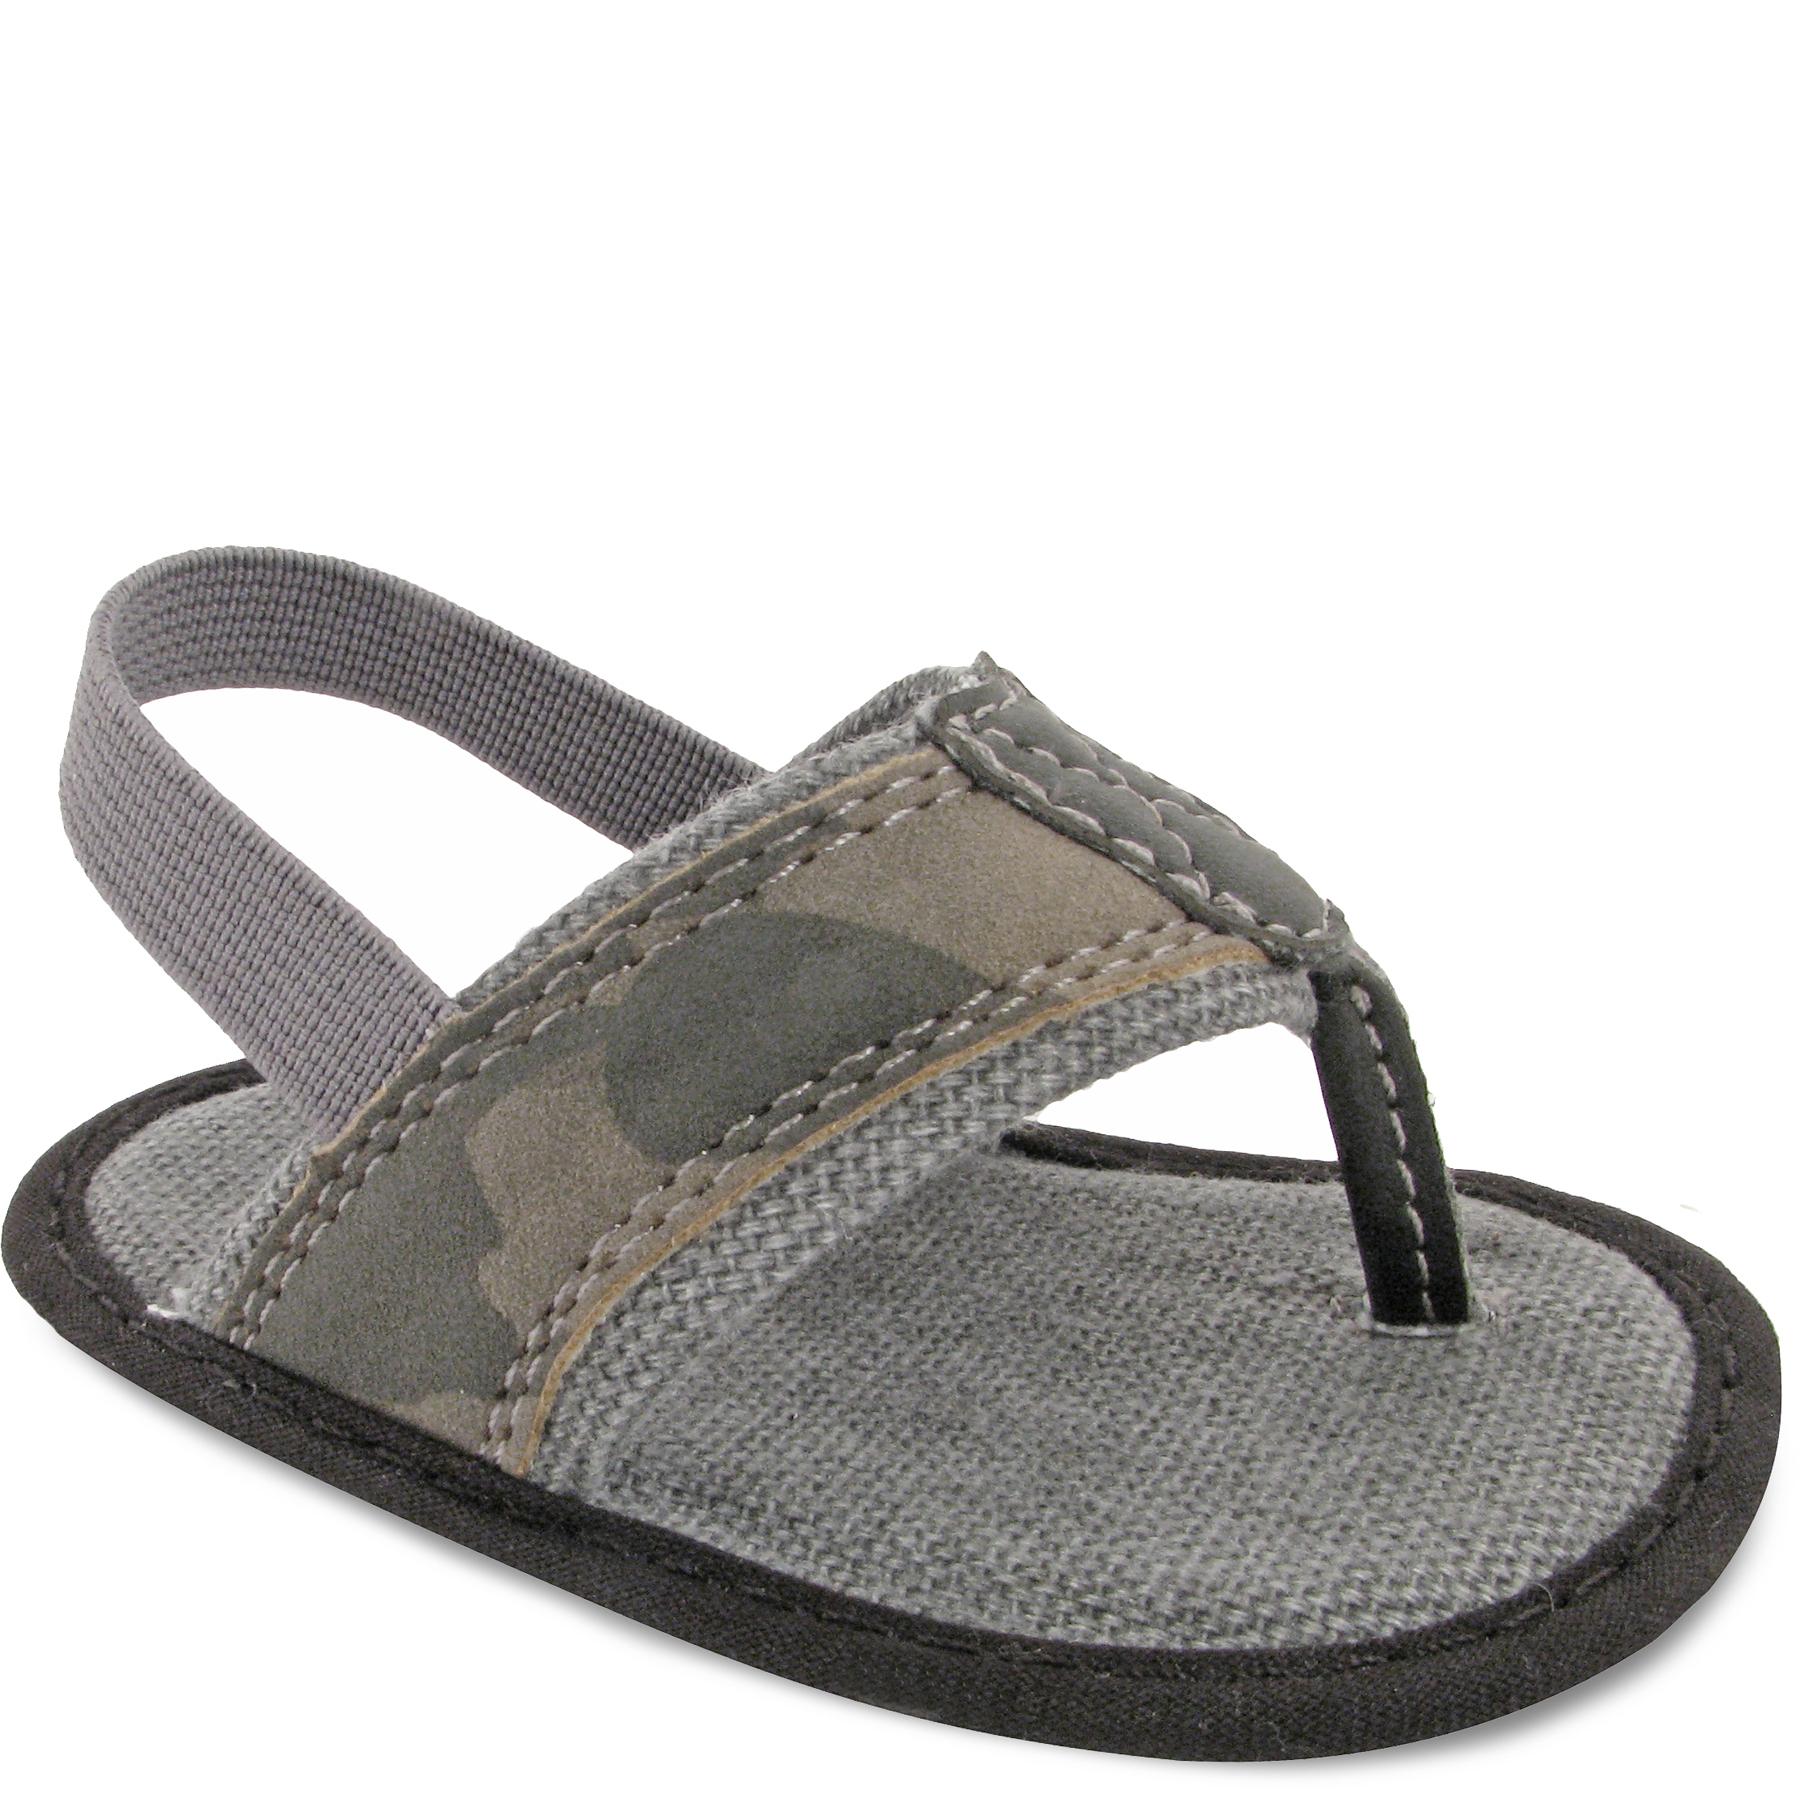 Little Wonders Baby Boy's Gray/Camouflage Thong Sandal